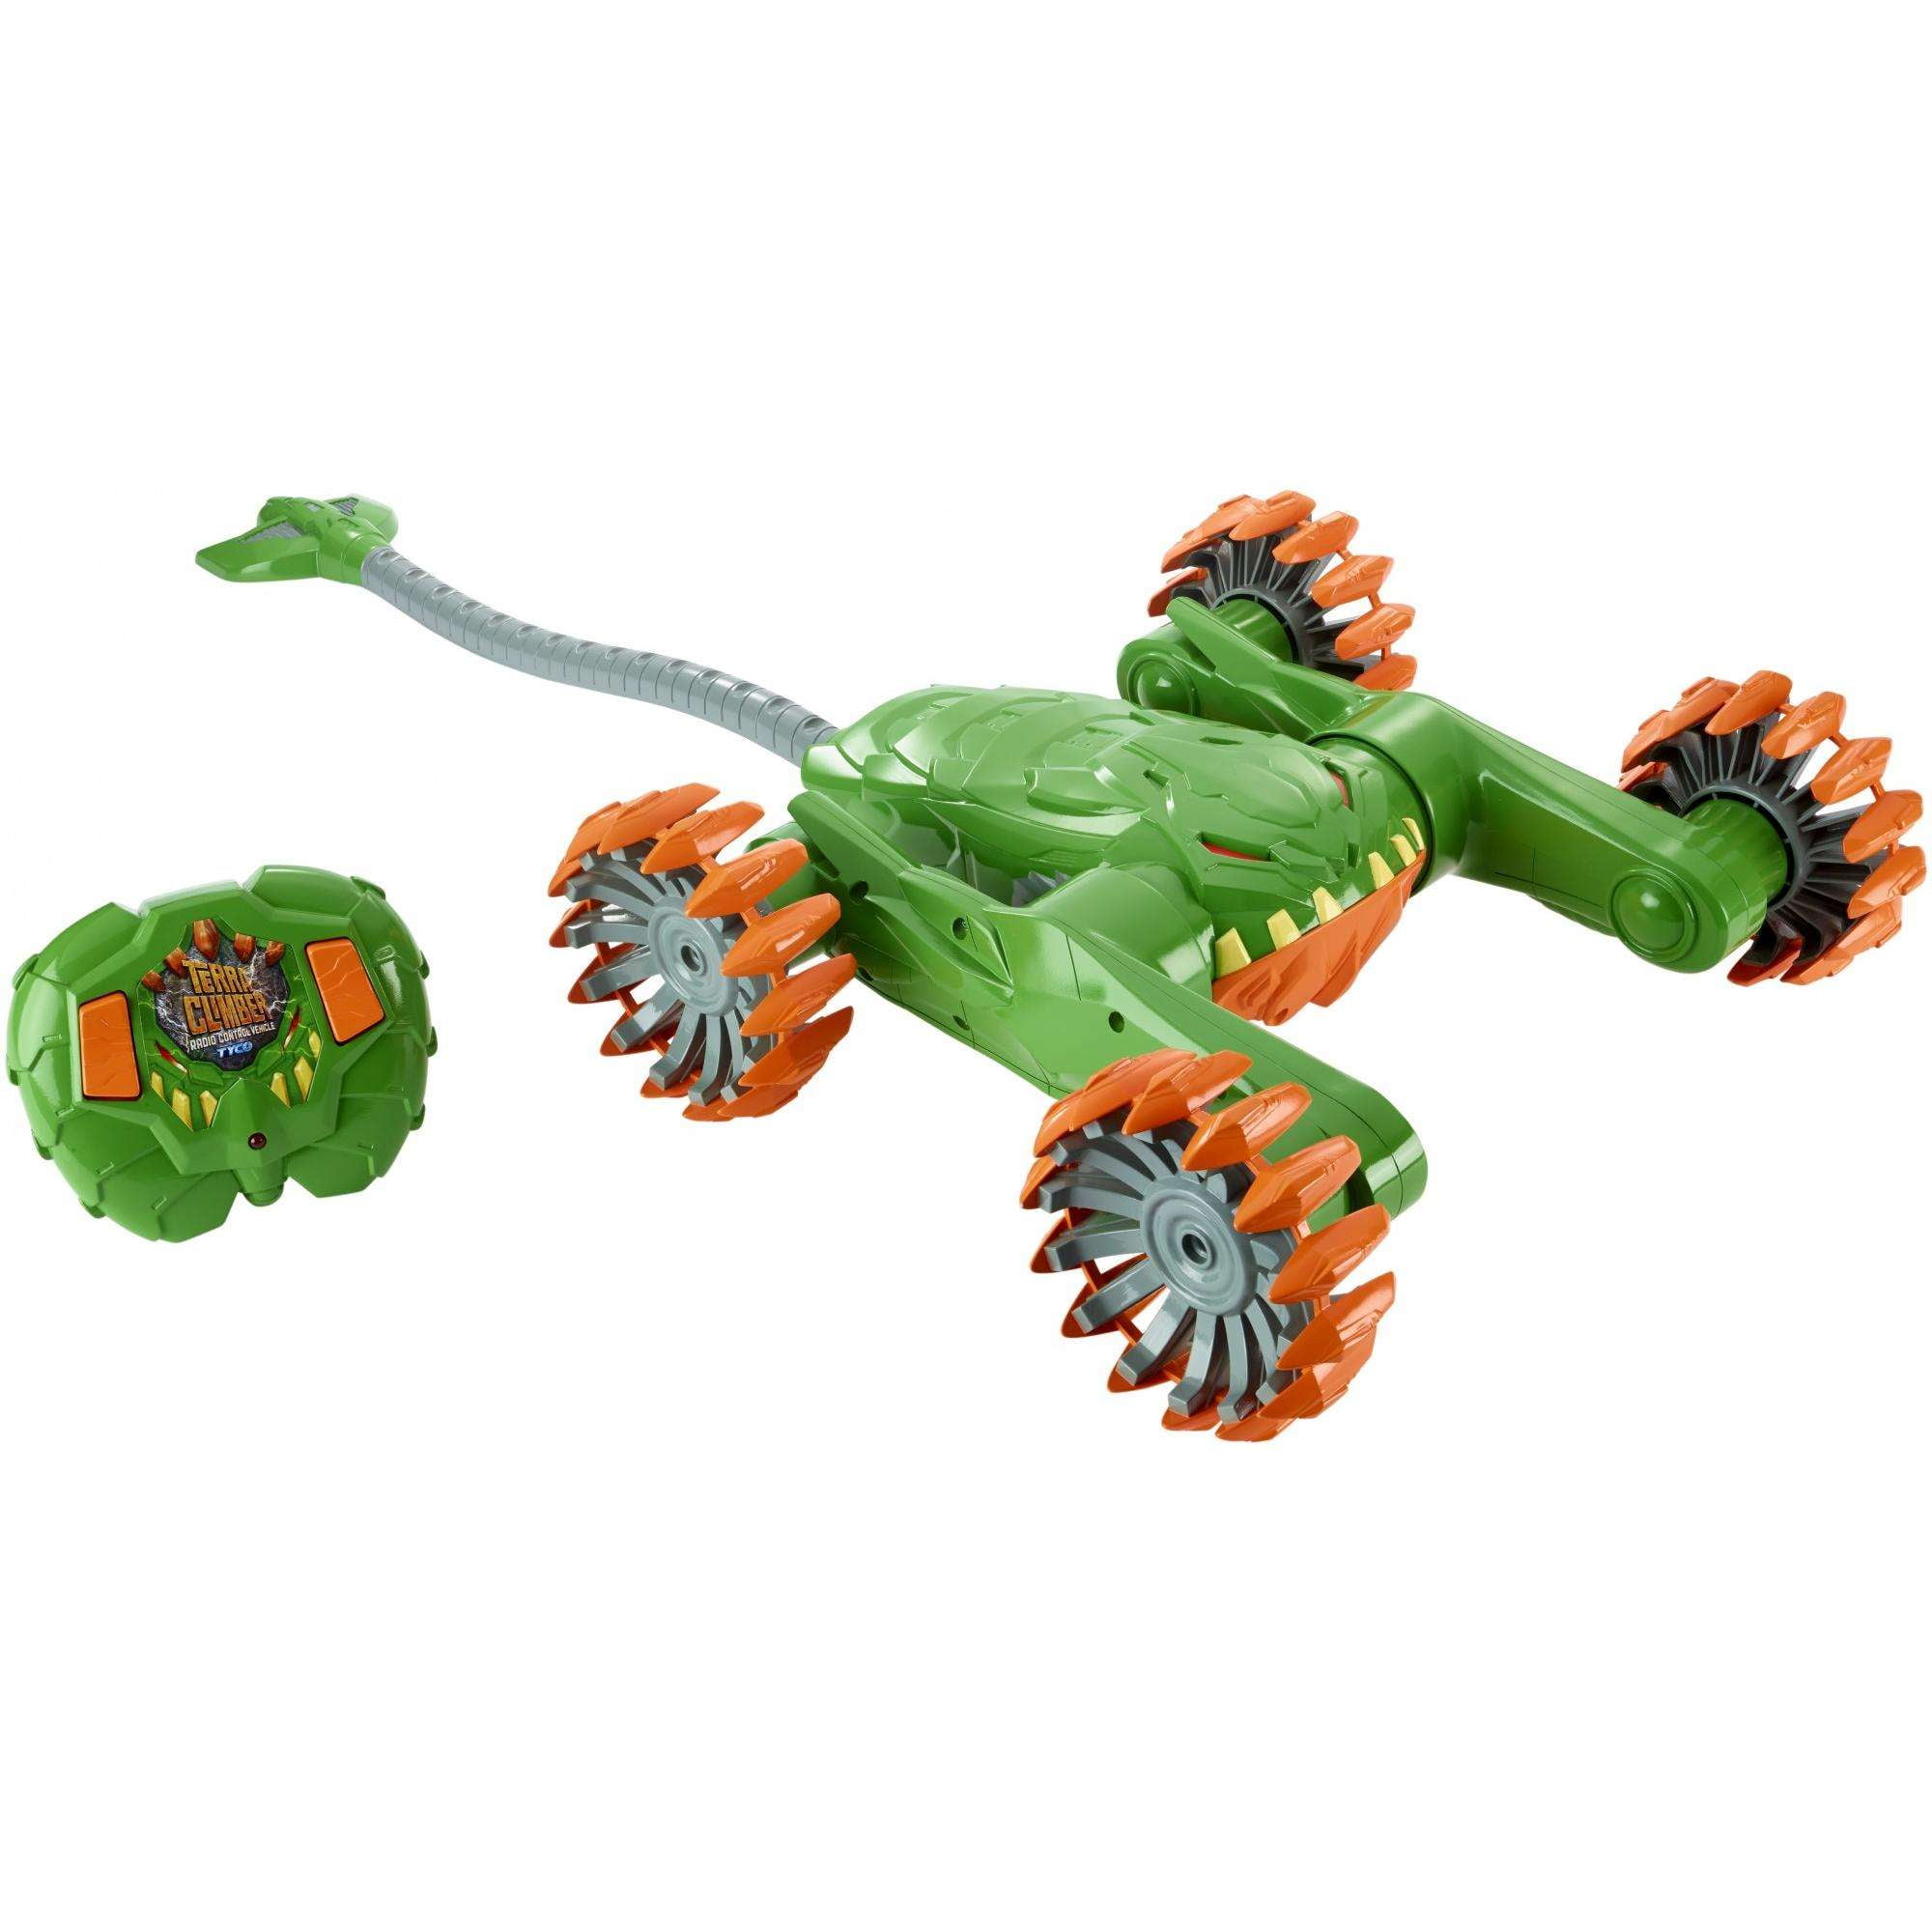 All-Terrain Climber Durable Boley 2099 Action-Packed RC Car Toy for Boys and Girls Easy to Control Perfect for Gifts and Party Favors! Lightning Raider 4-Wheel Drive Radio Control 